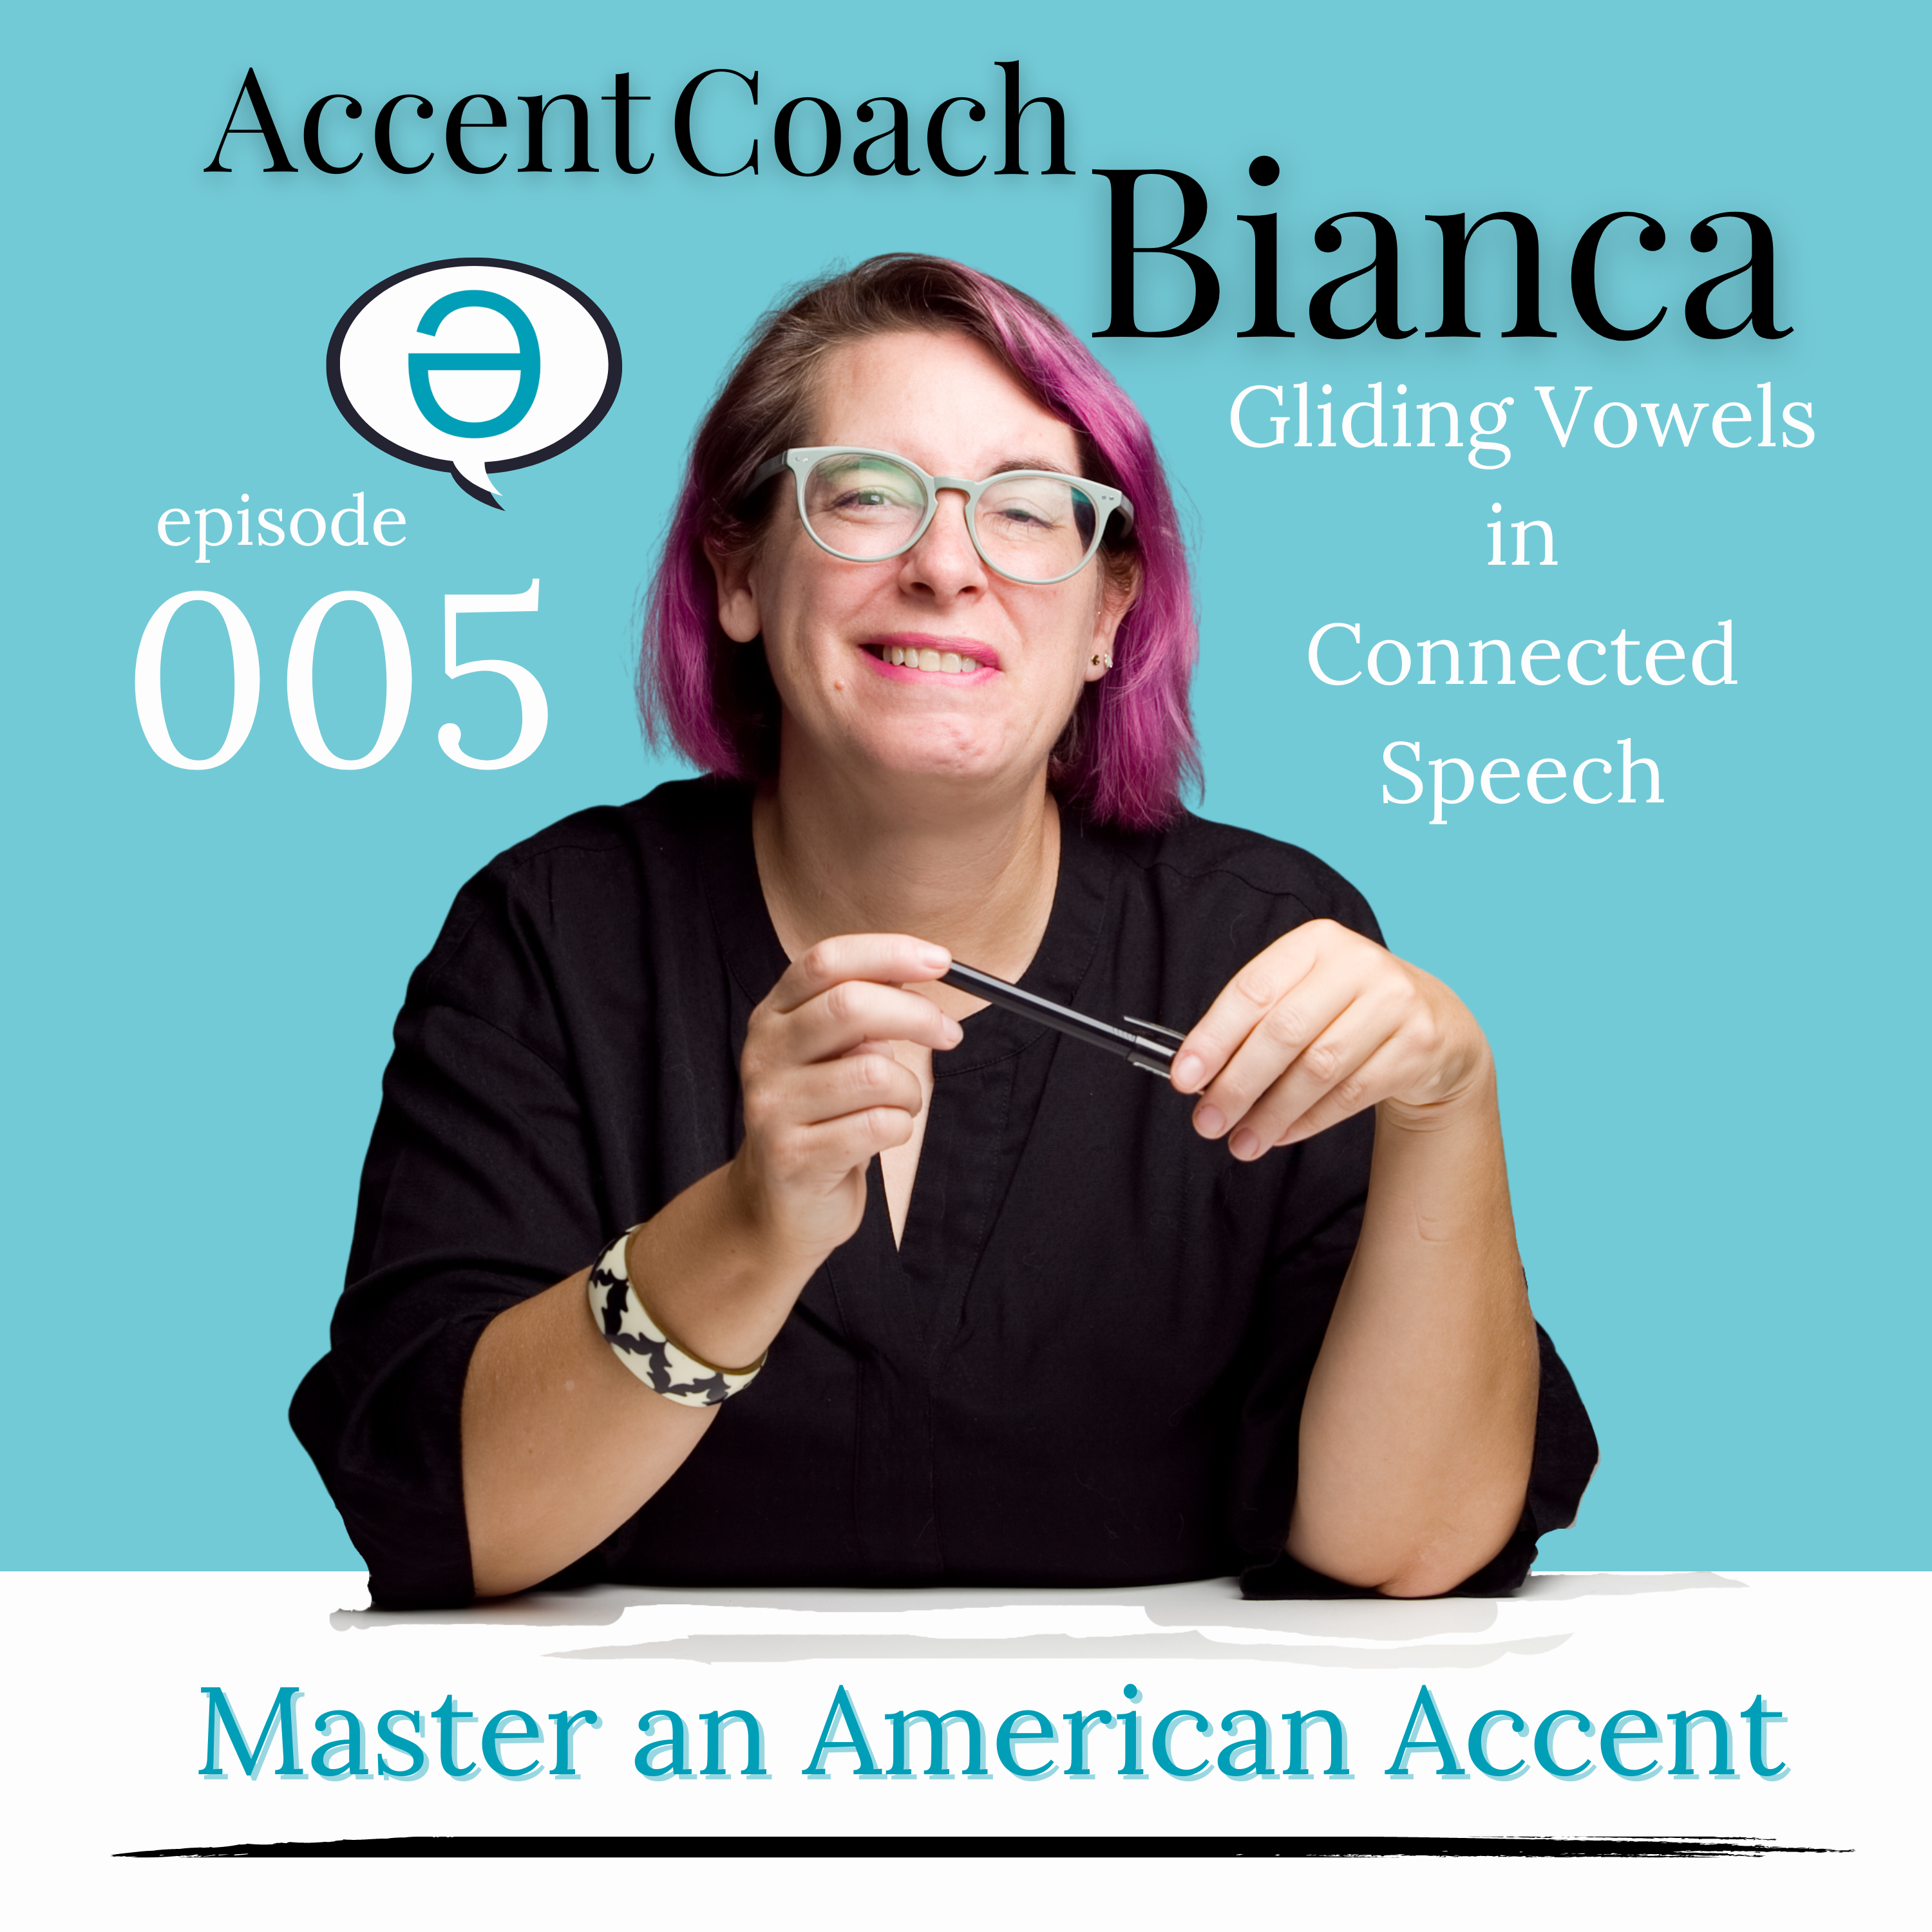 E005: Gliding Vowels in Connected Speech